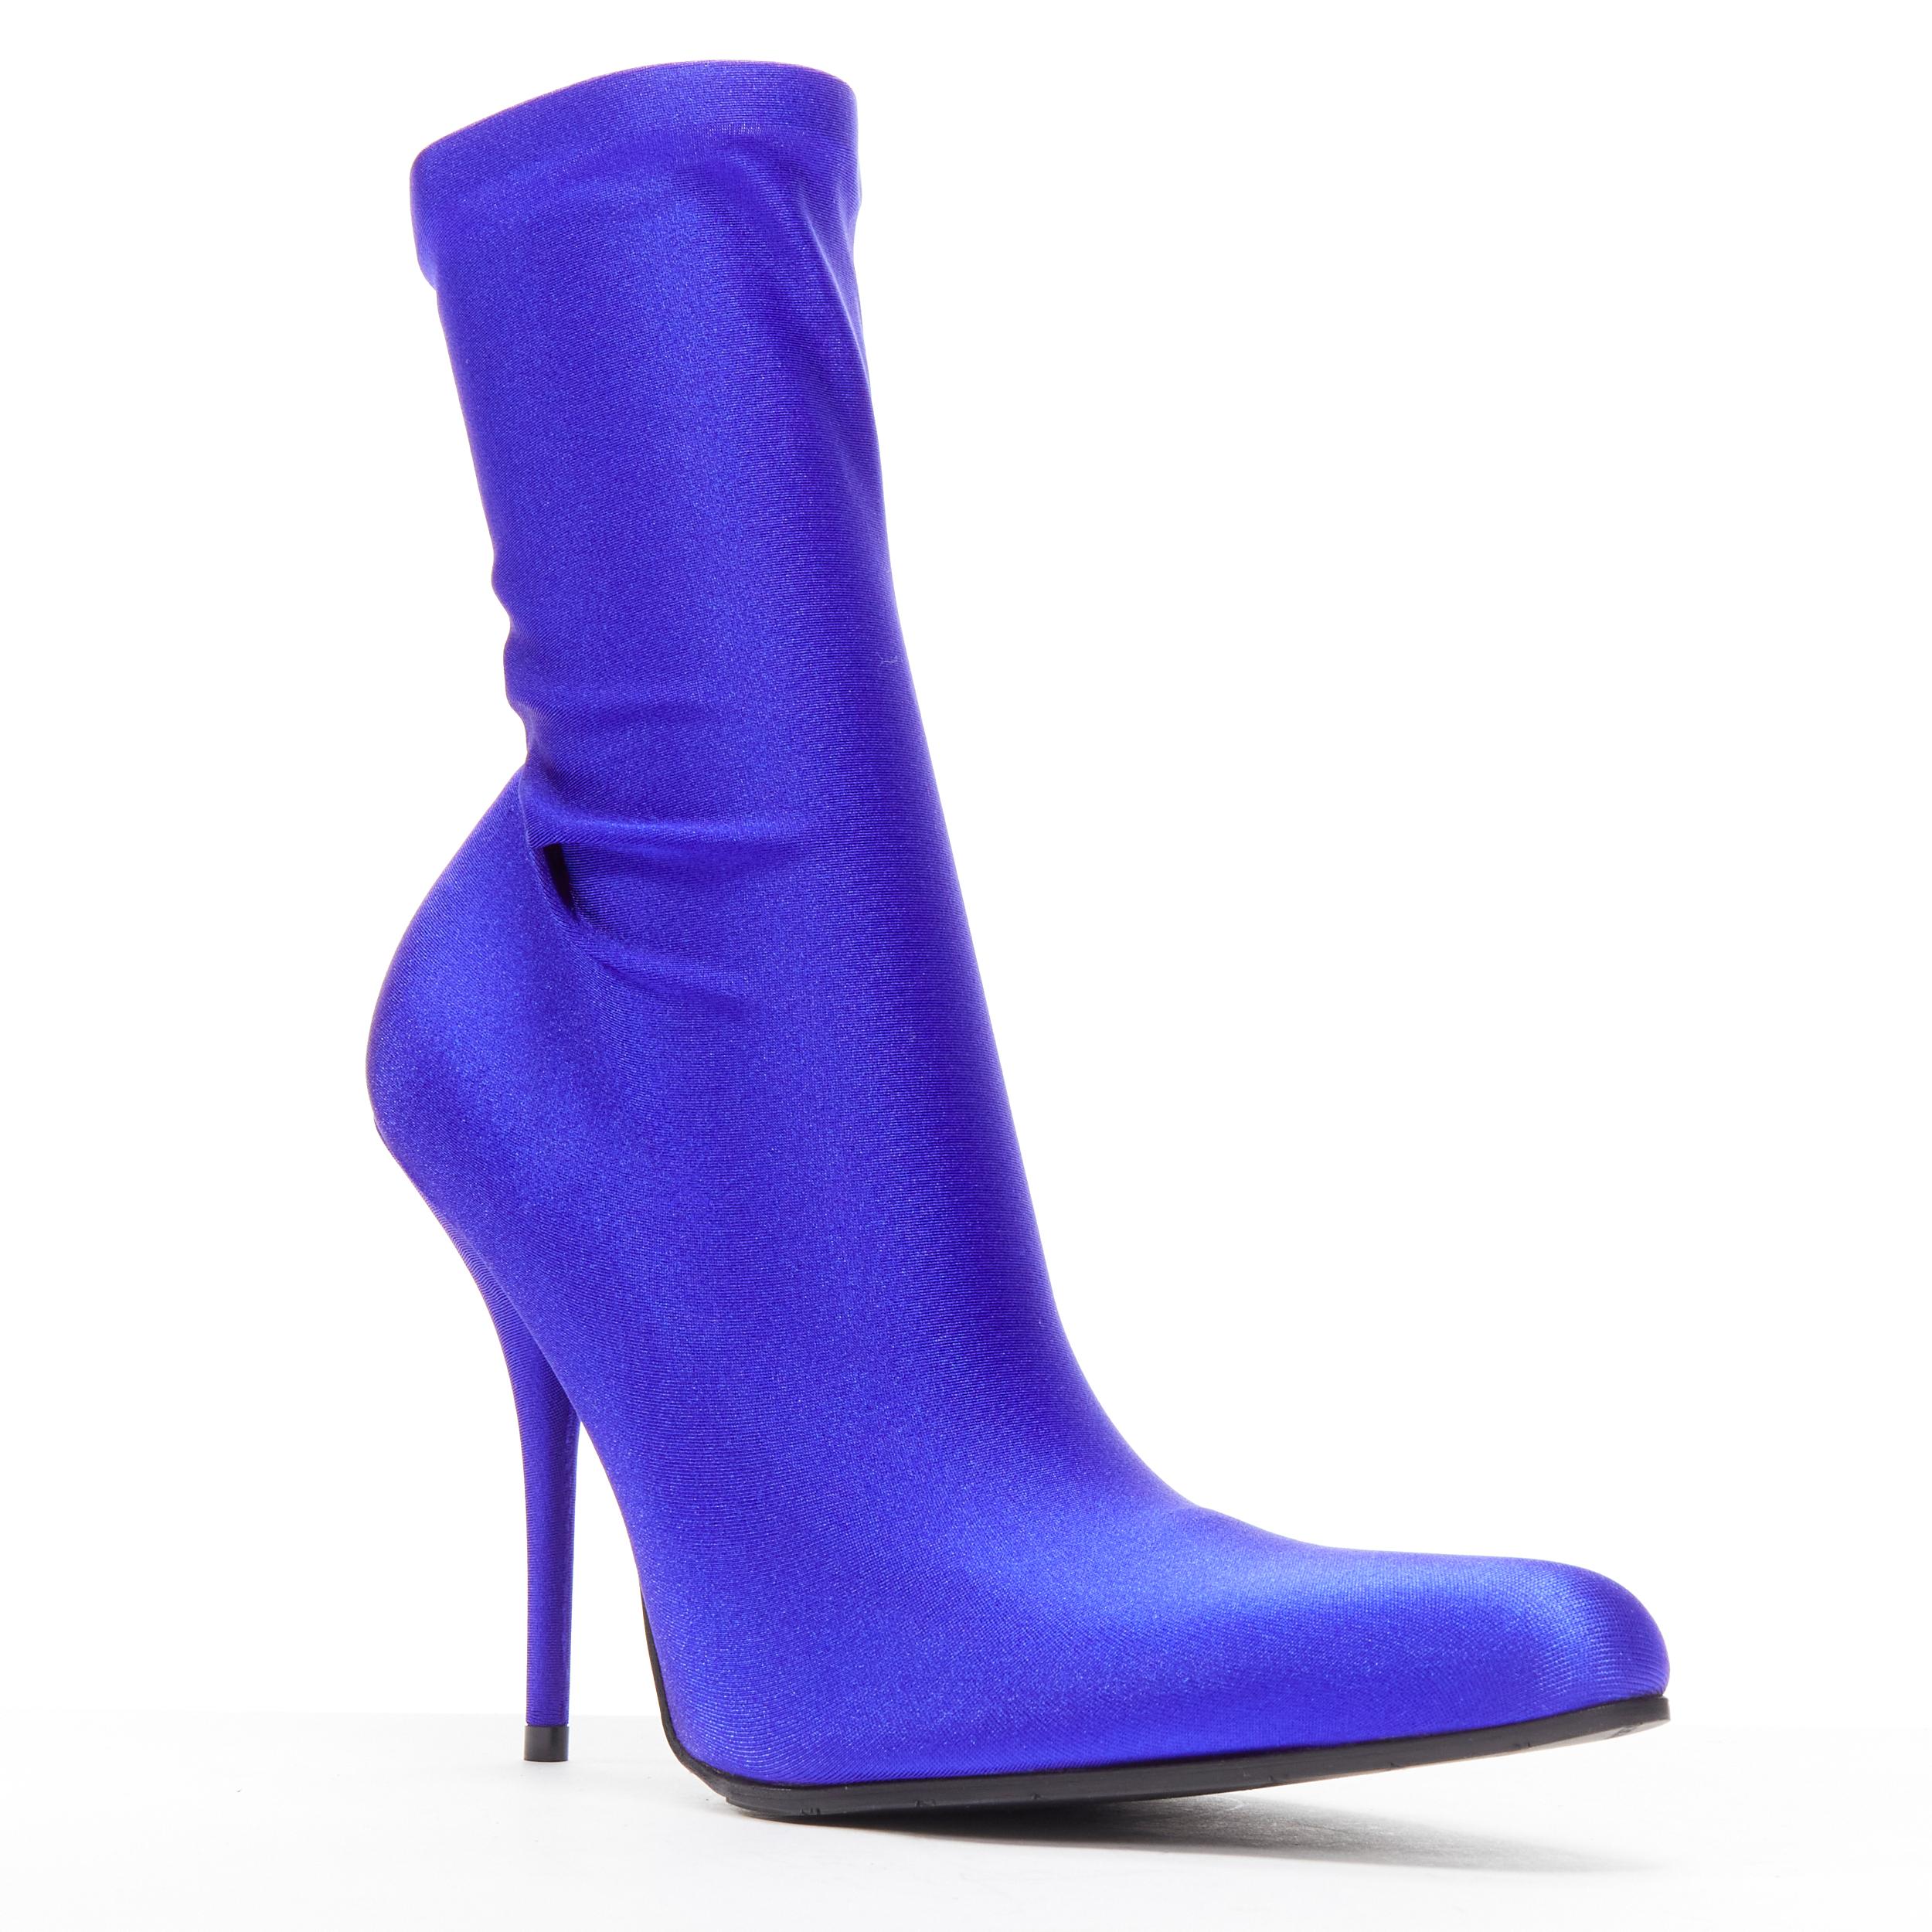 new BALENCIAGA Demna blue lycra high heeled sock boots EU39 Kim Kardashian
Reference: TGAS/D00195
Brand: Balenciaga
Designer: Demna
Model: Sock boot
Material: Jersey
Color: Blue
Pattern: Solid
Closure: Stretchy
Lining: Black Leather
Extra Details: